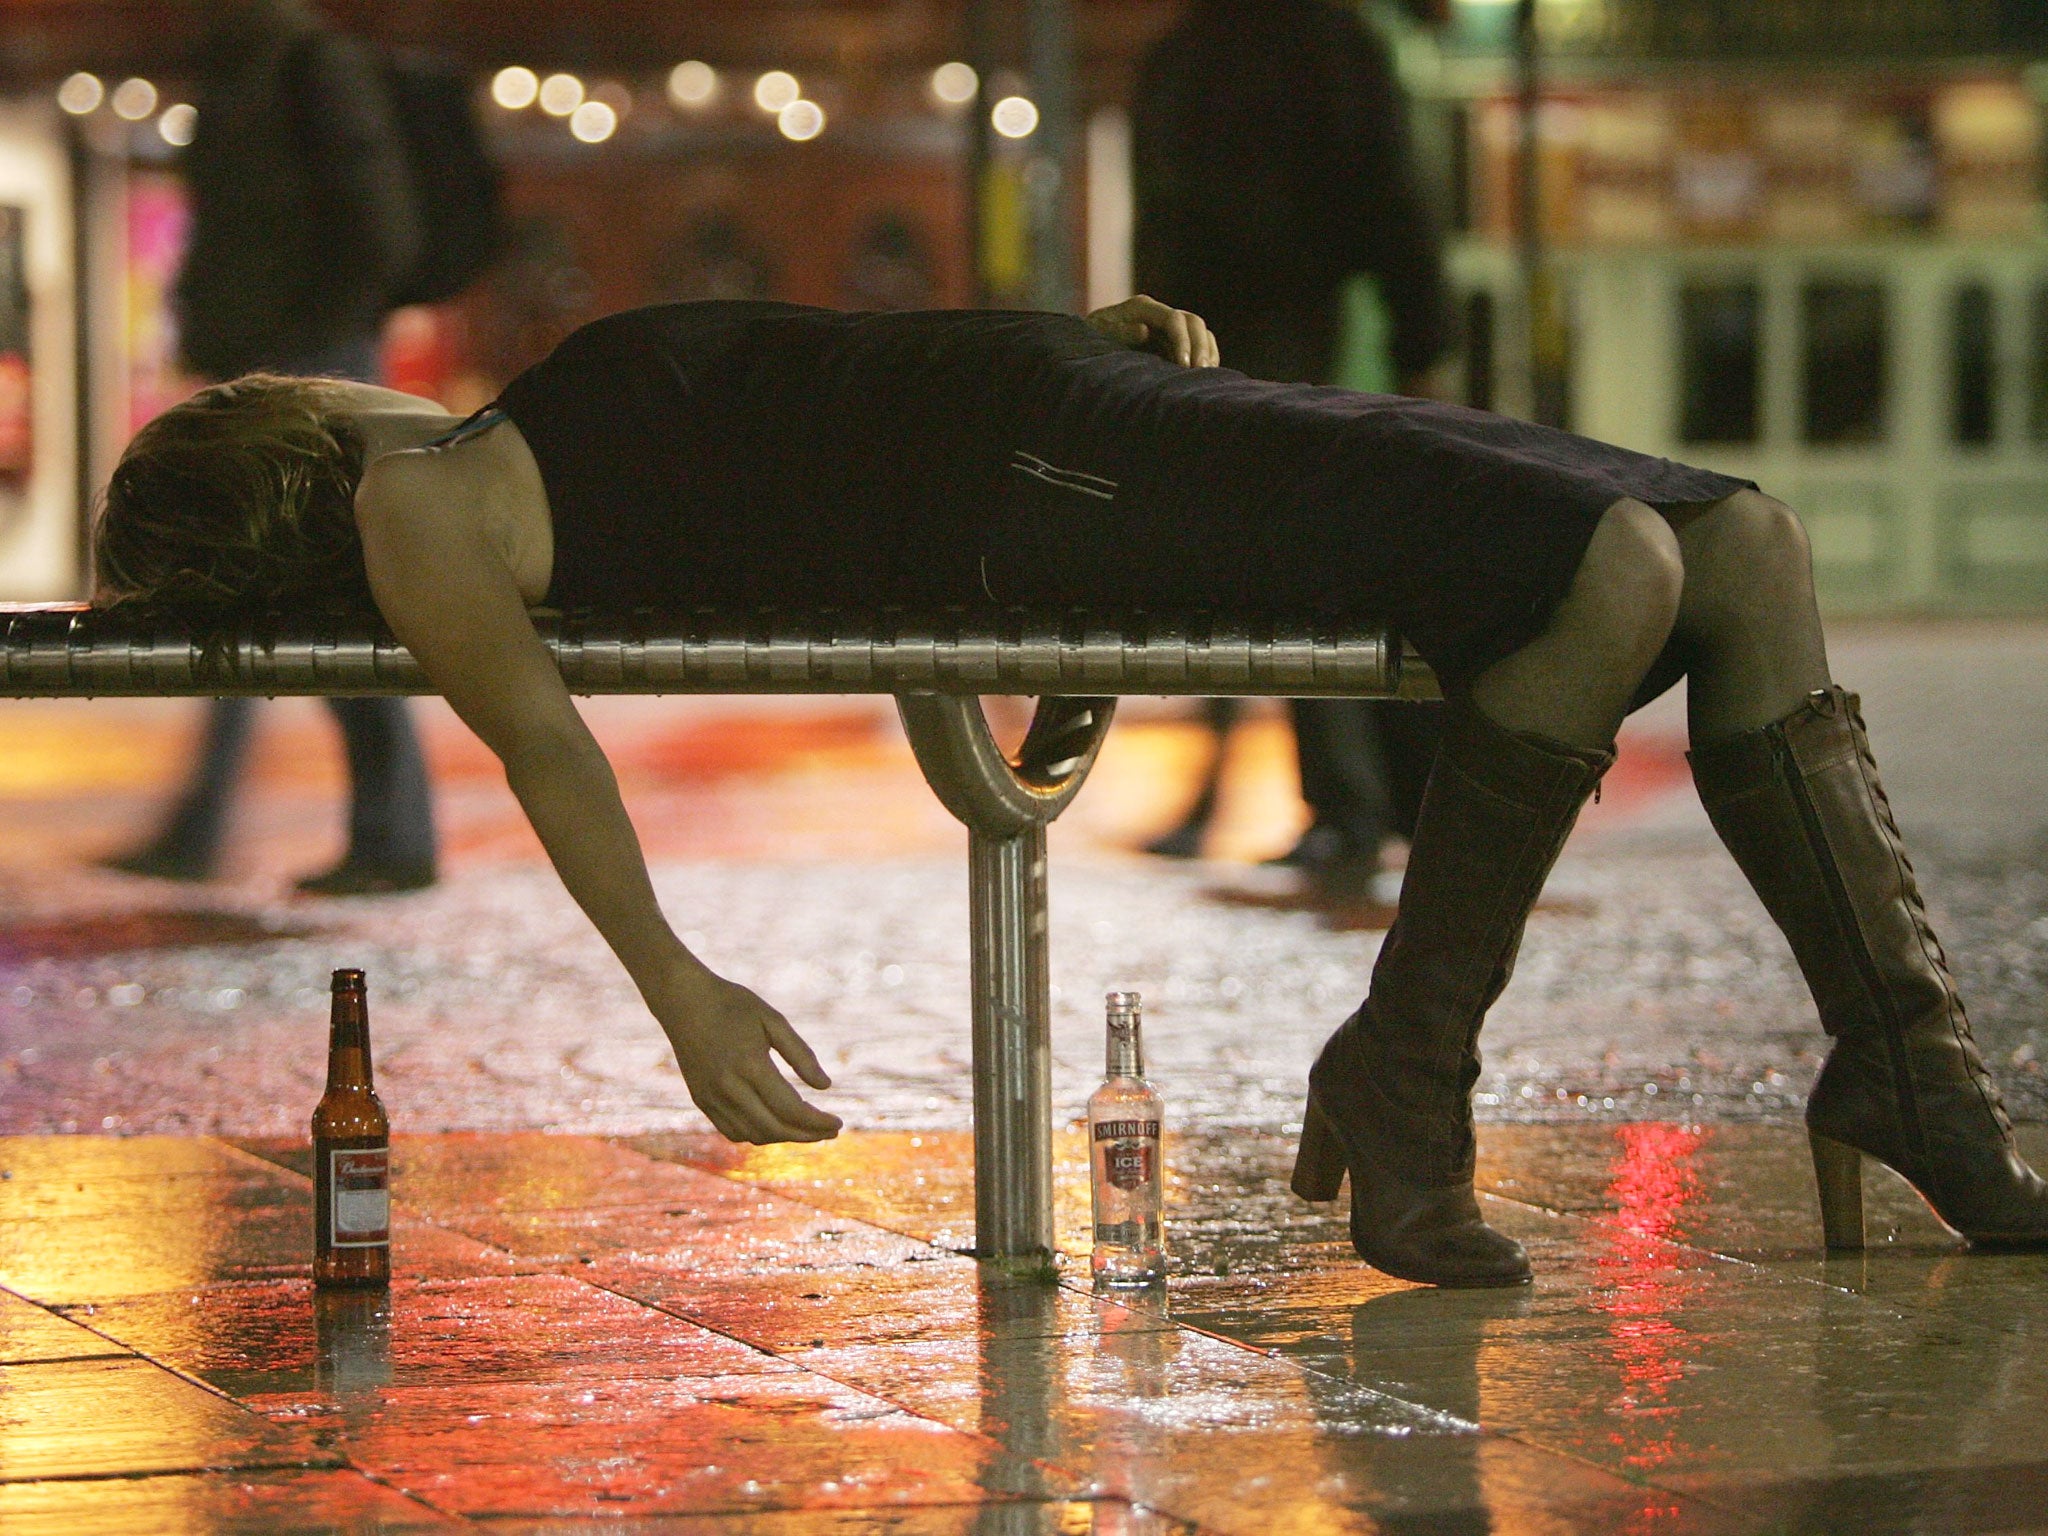 The notorious image – dating from 2005 in Bristol – that cemented the idea of binge-drinking youth